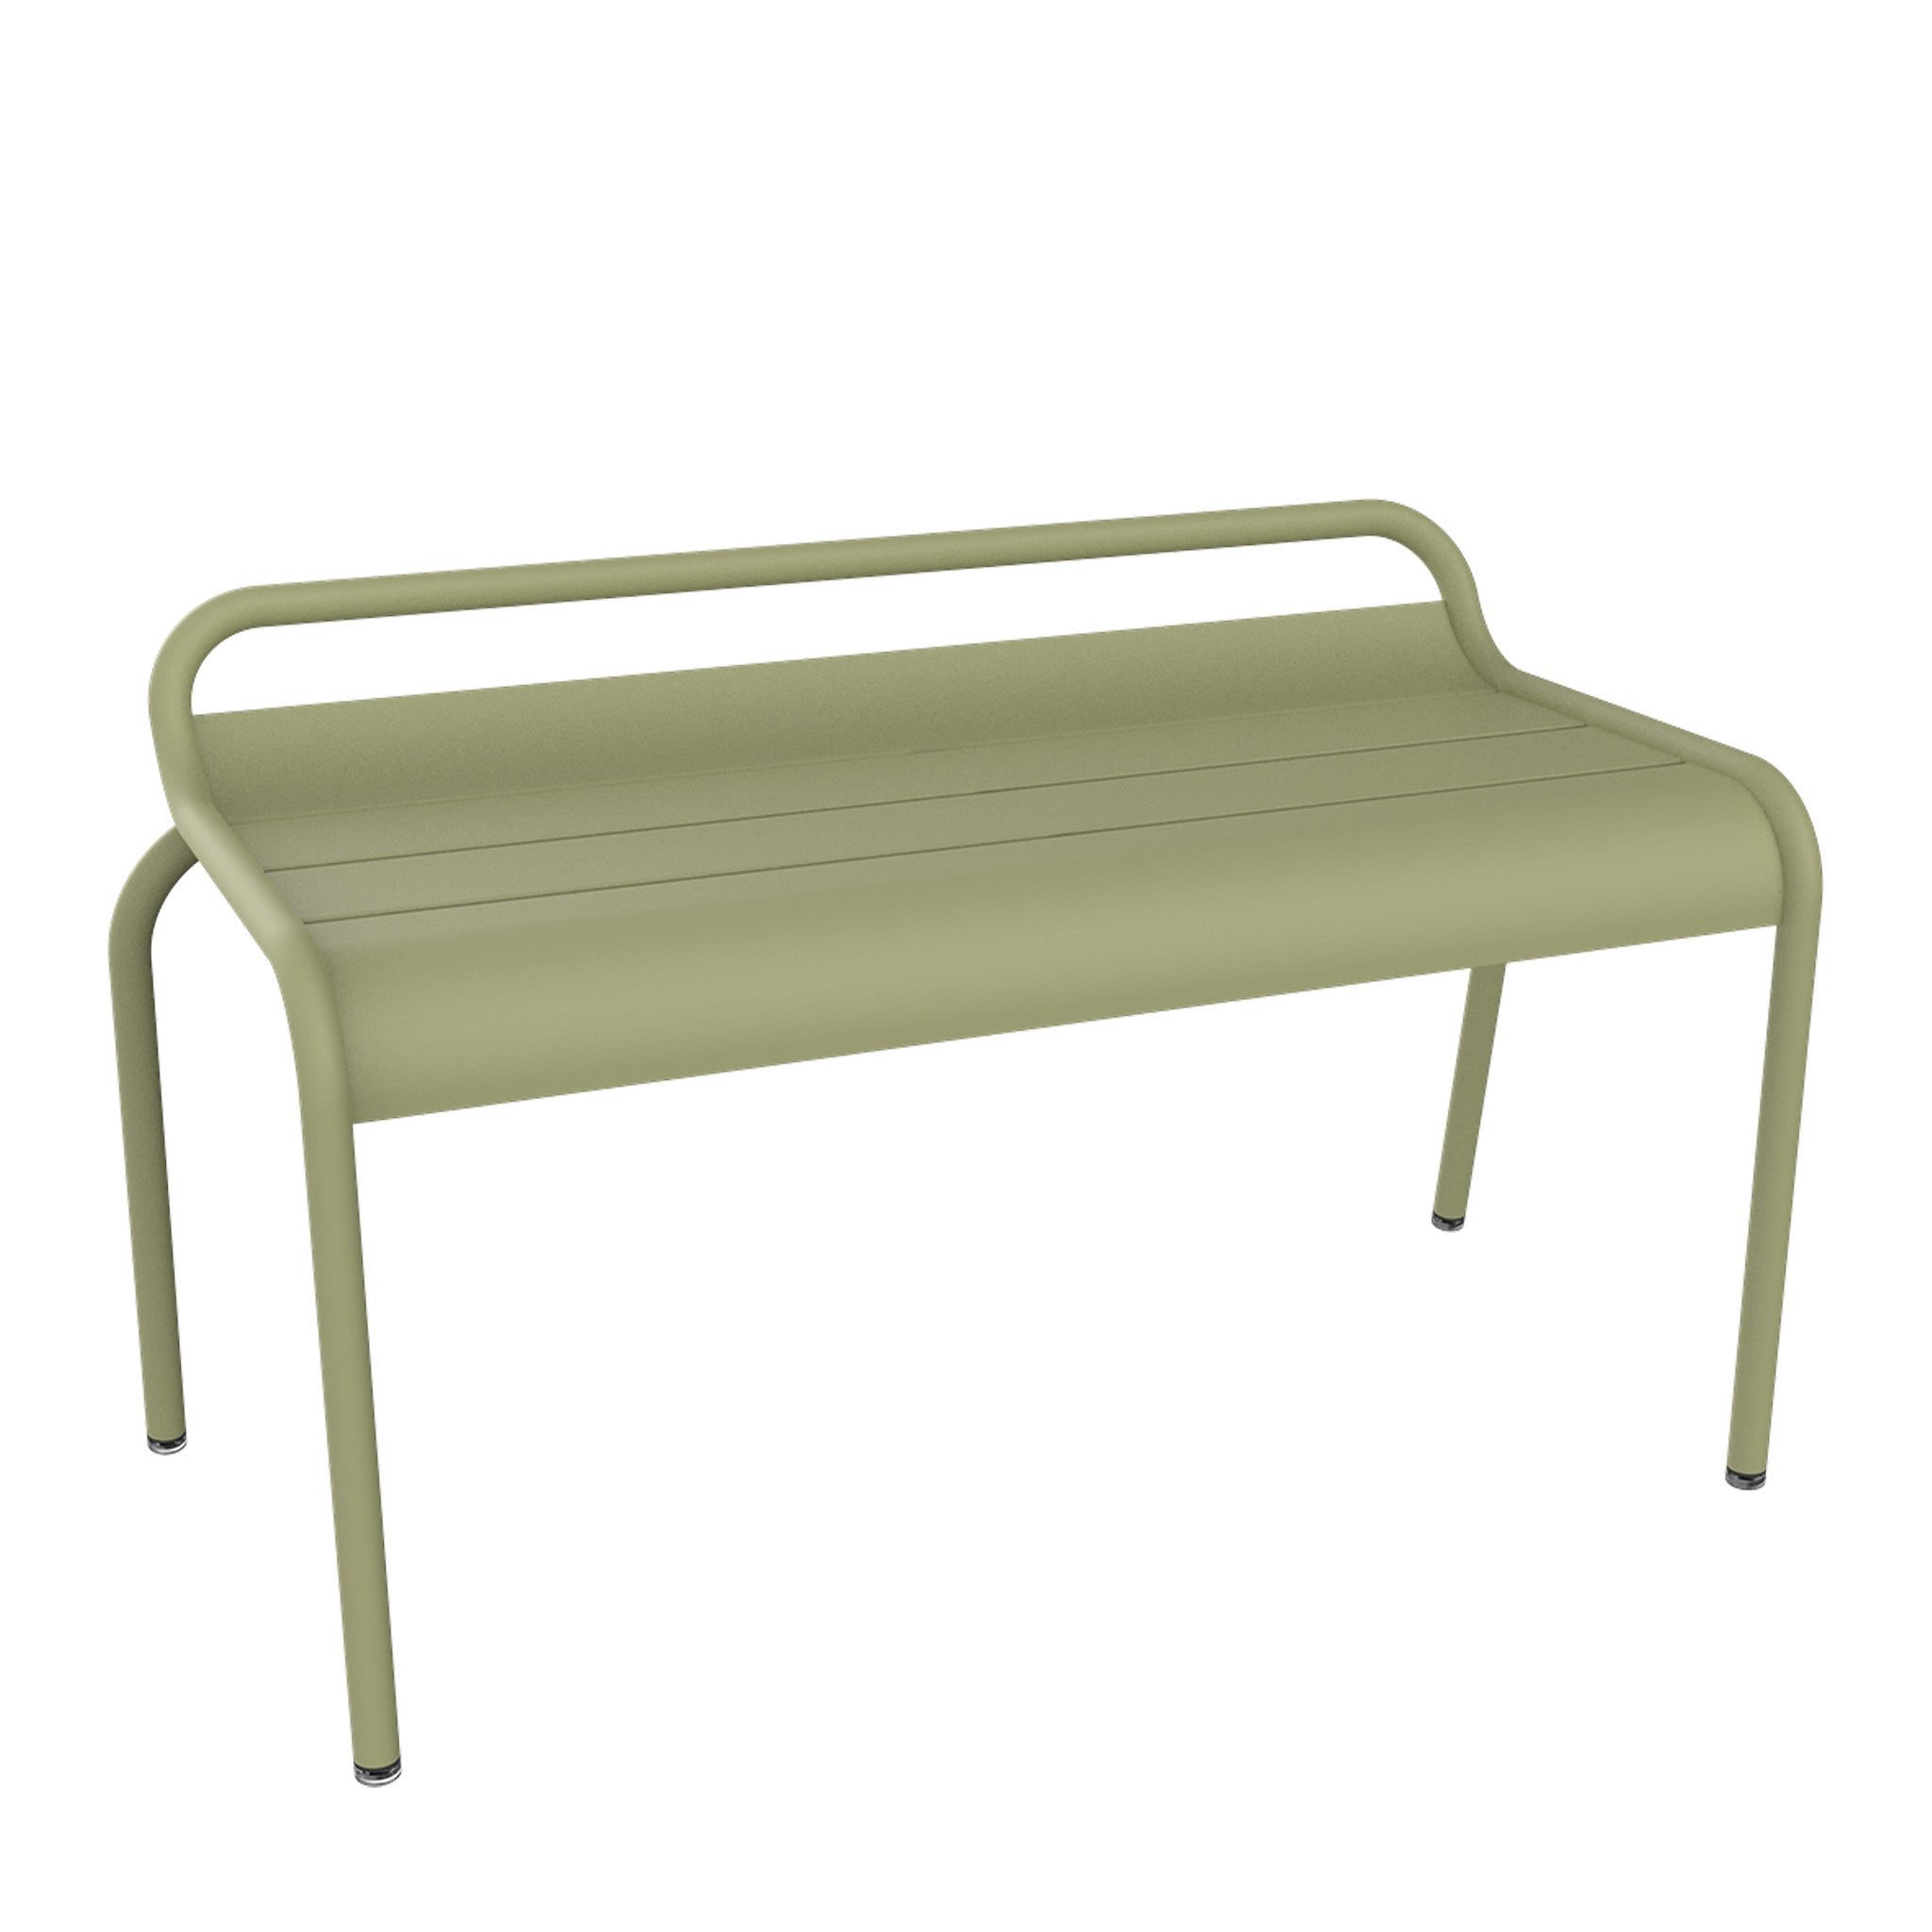 Luxembourg Compact Bench by Fermob